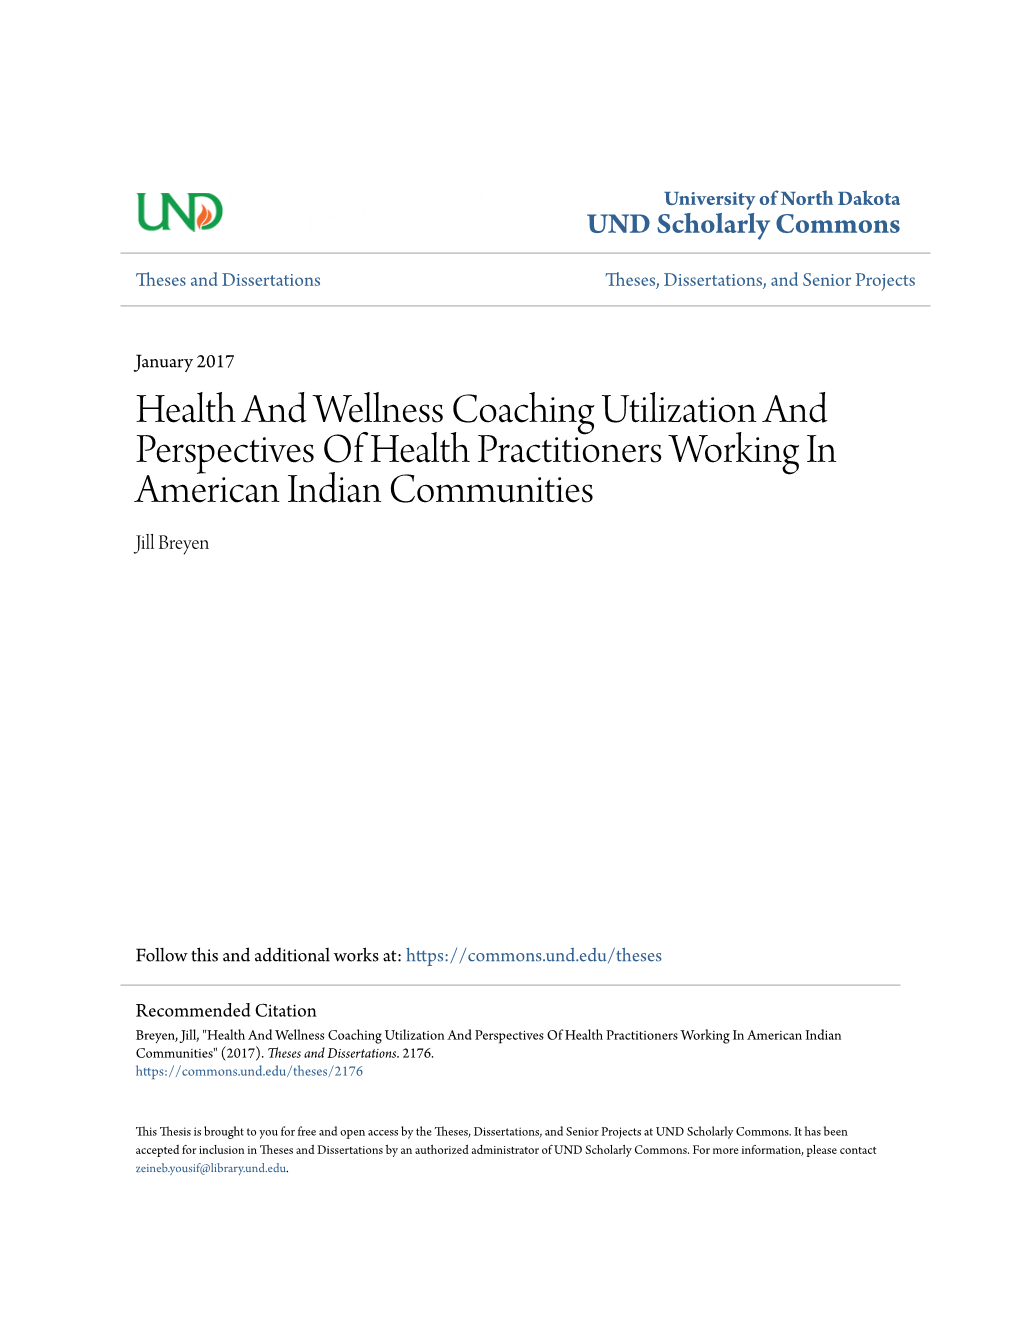 Health and Wellness Coaching Utilization and Perspectives of Health Practitioners Working in American Indian Communities Jill Breyen